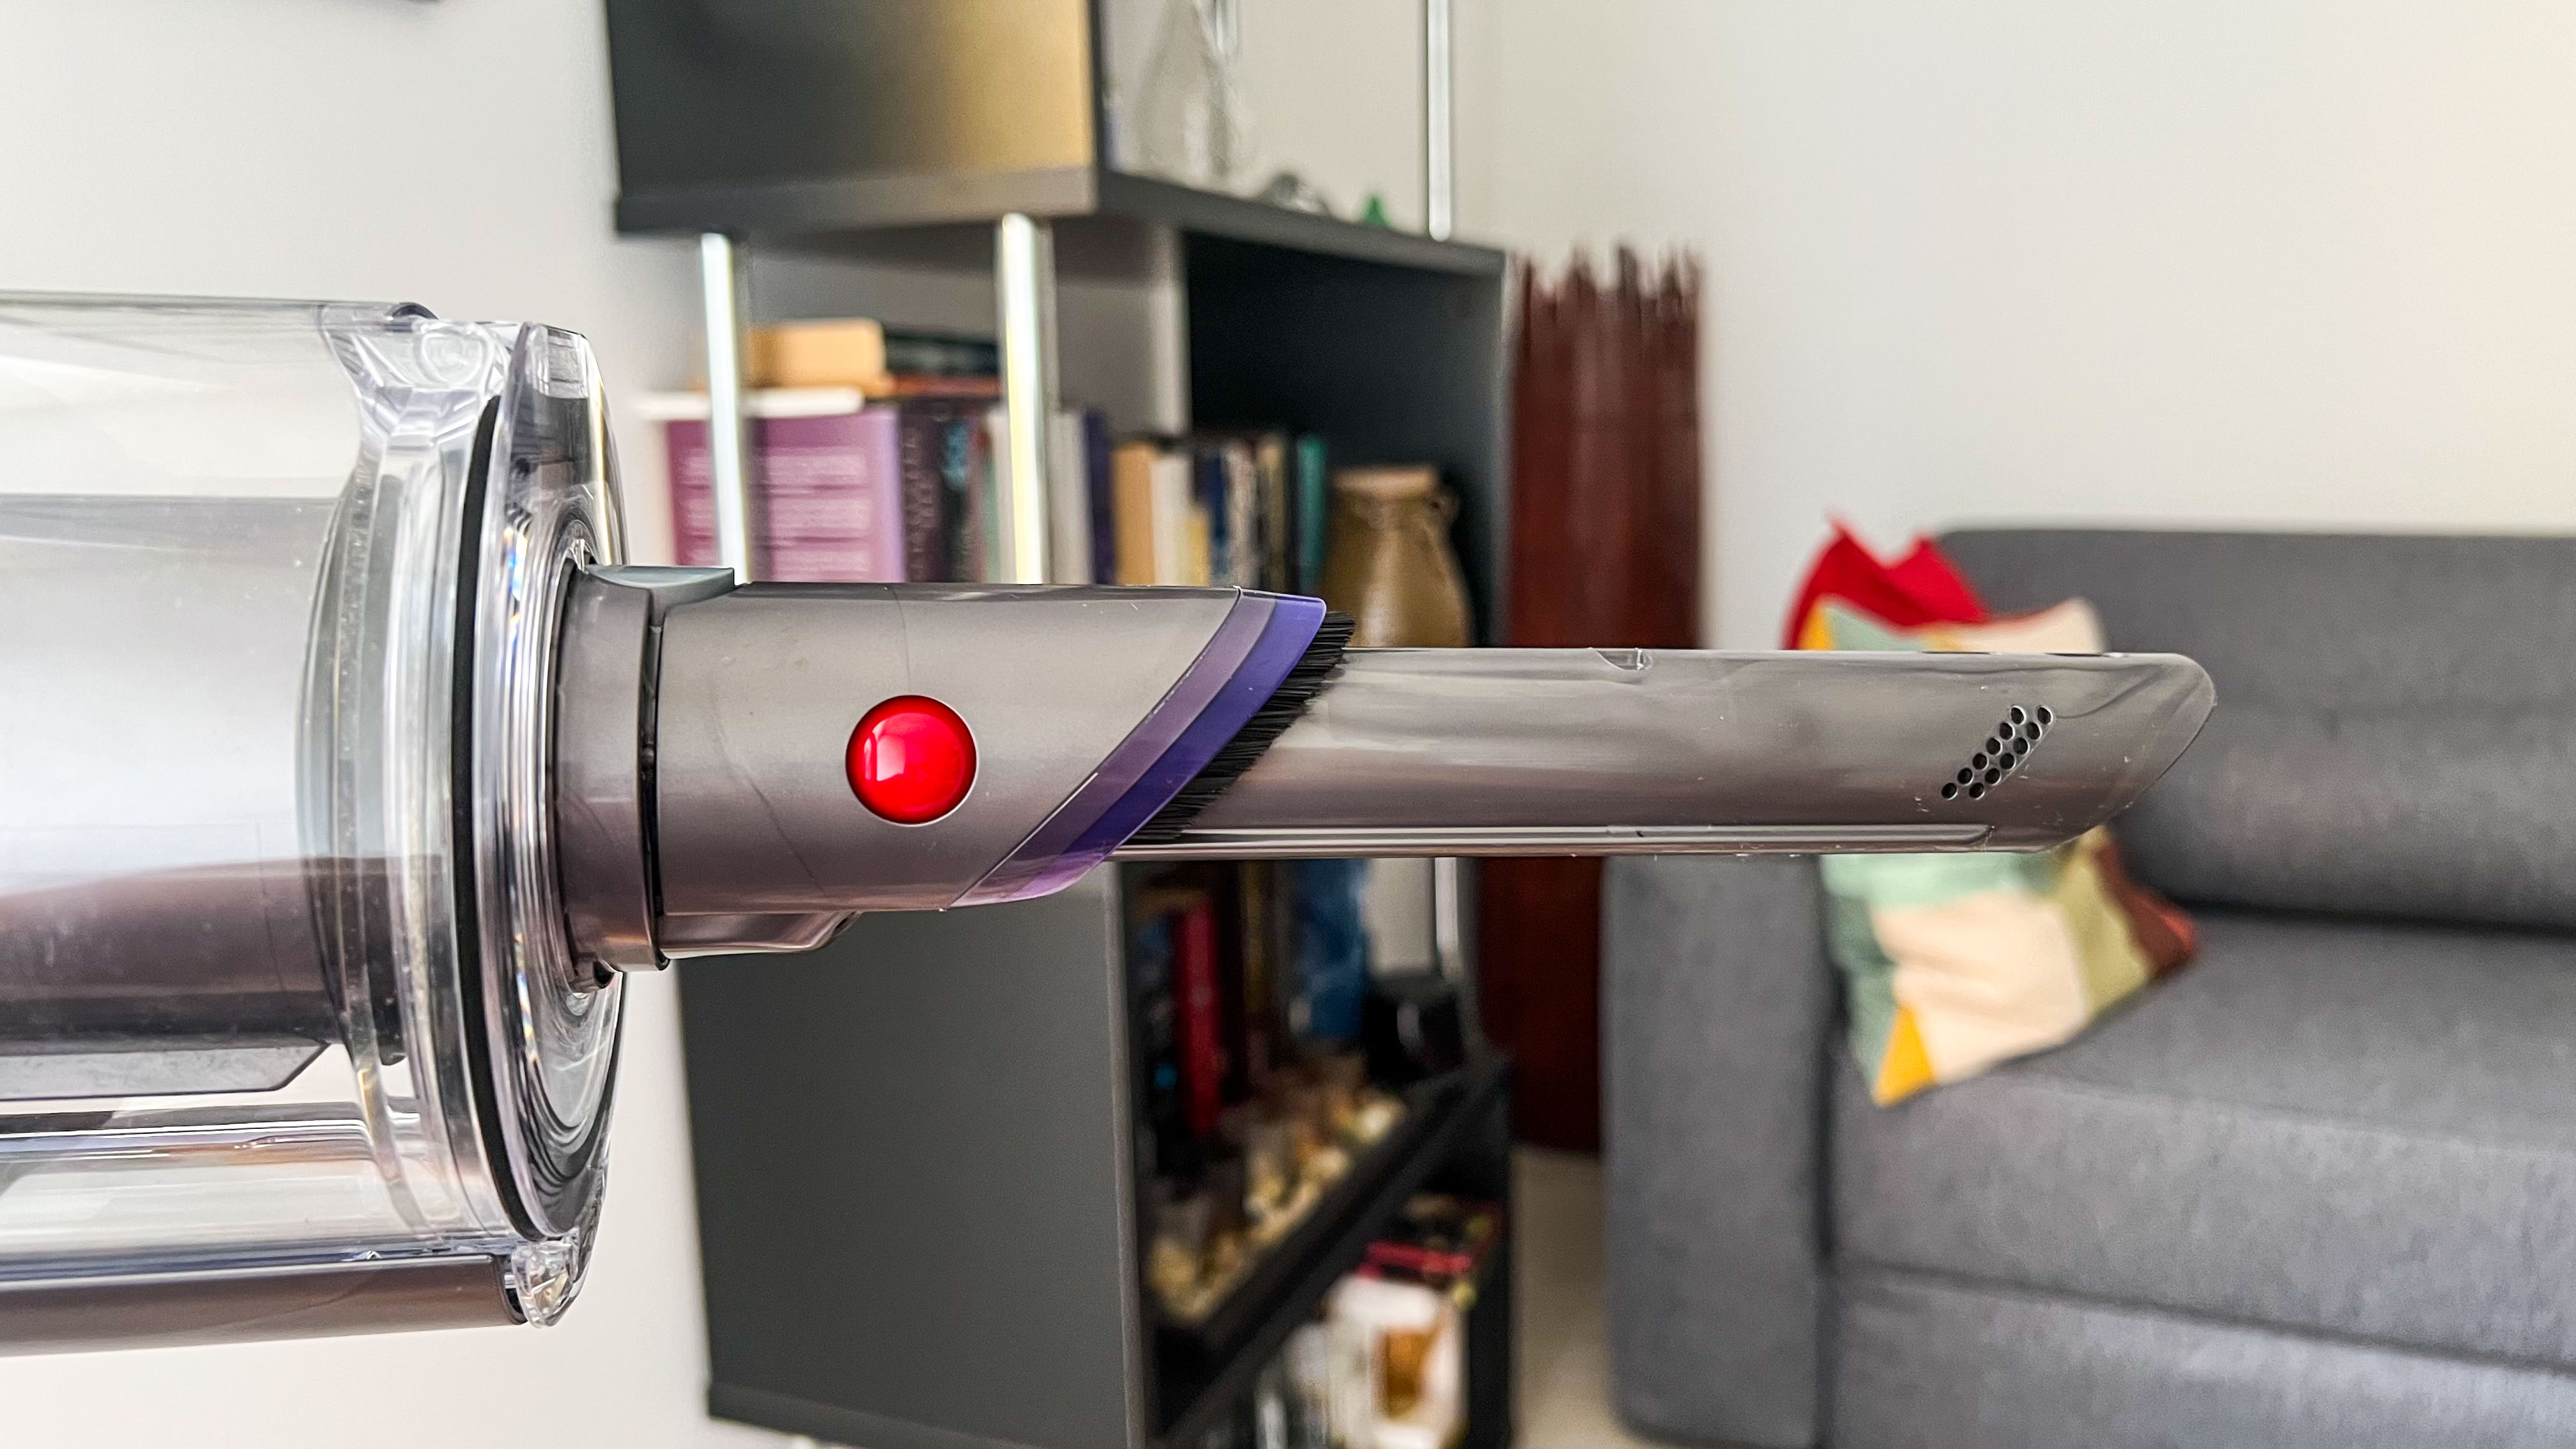 The new thinner and integrated crevice tool of the Dyson Gen5 Detect